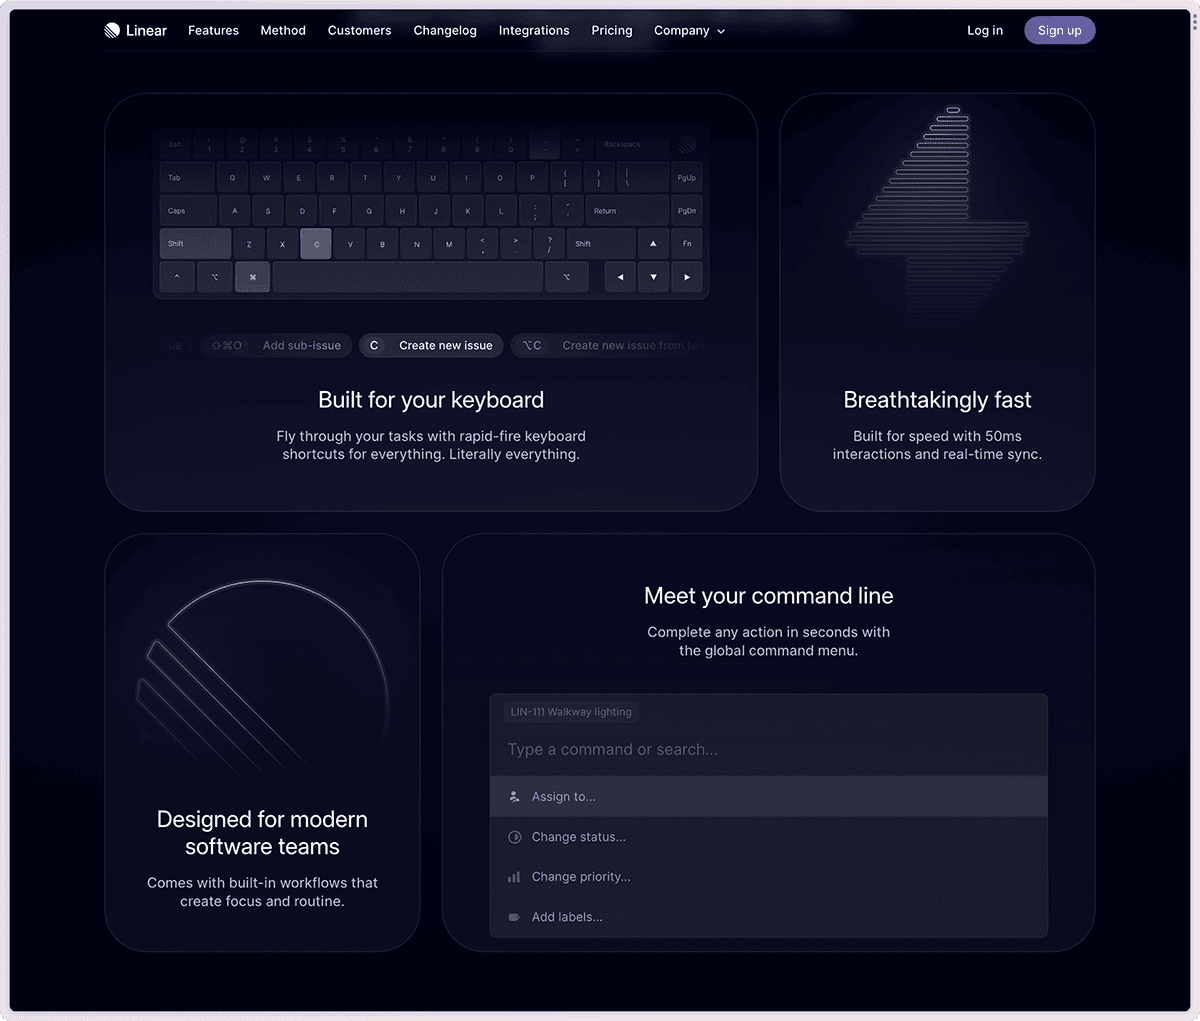 Linear's Feature Grid Section